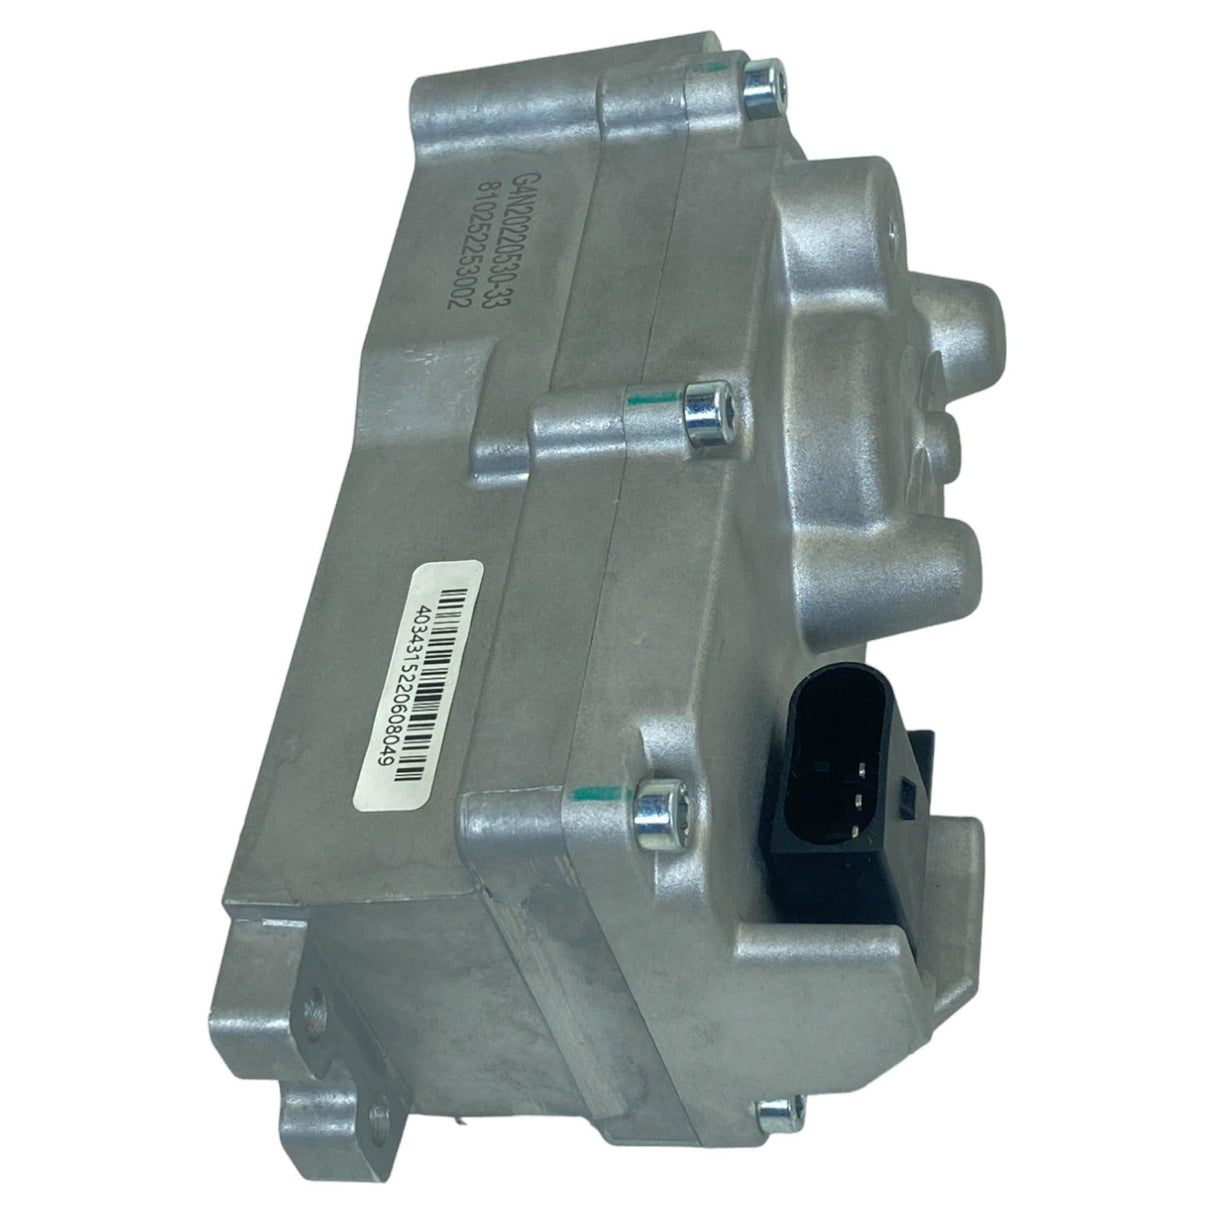 5601240Nx Aftermarket Turbocharger Actuator For Cummins Isb 6.7L - Truck To Trailer